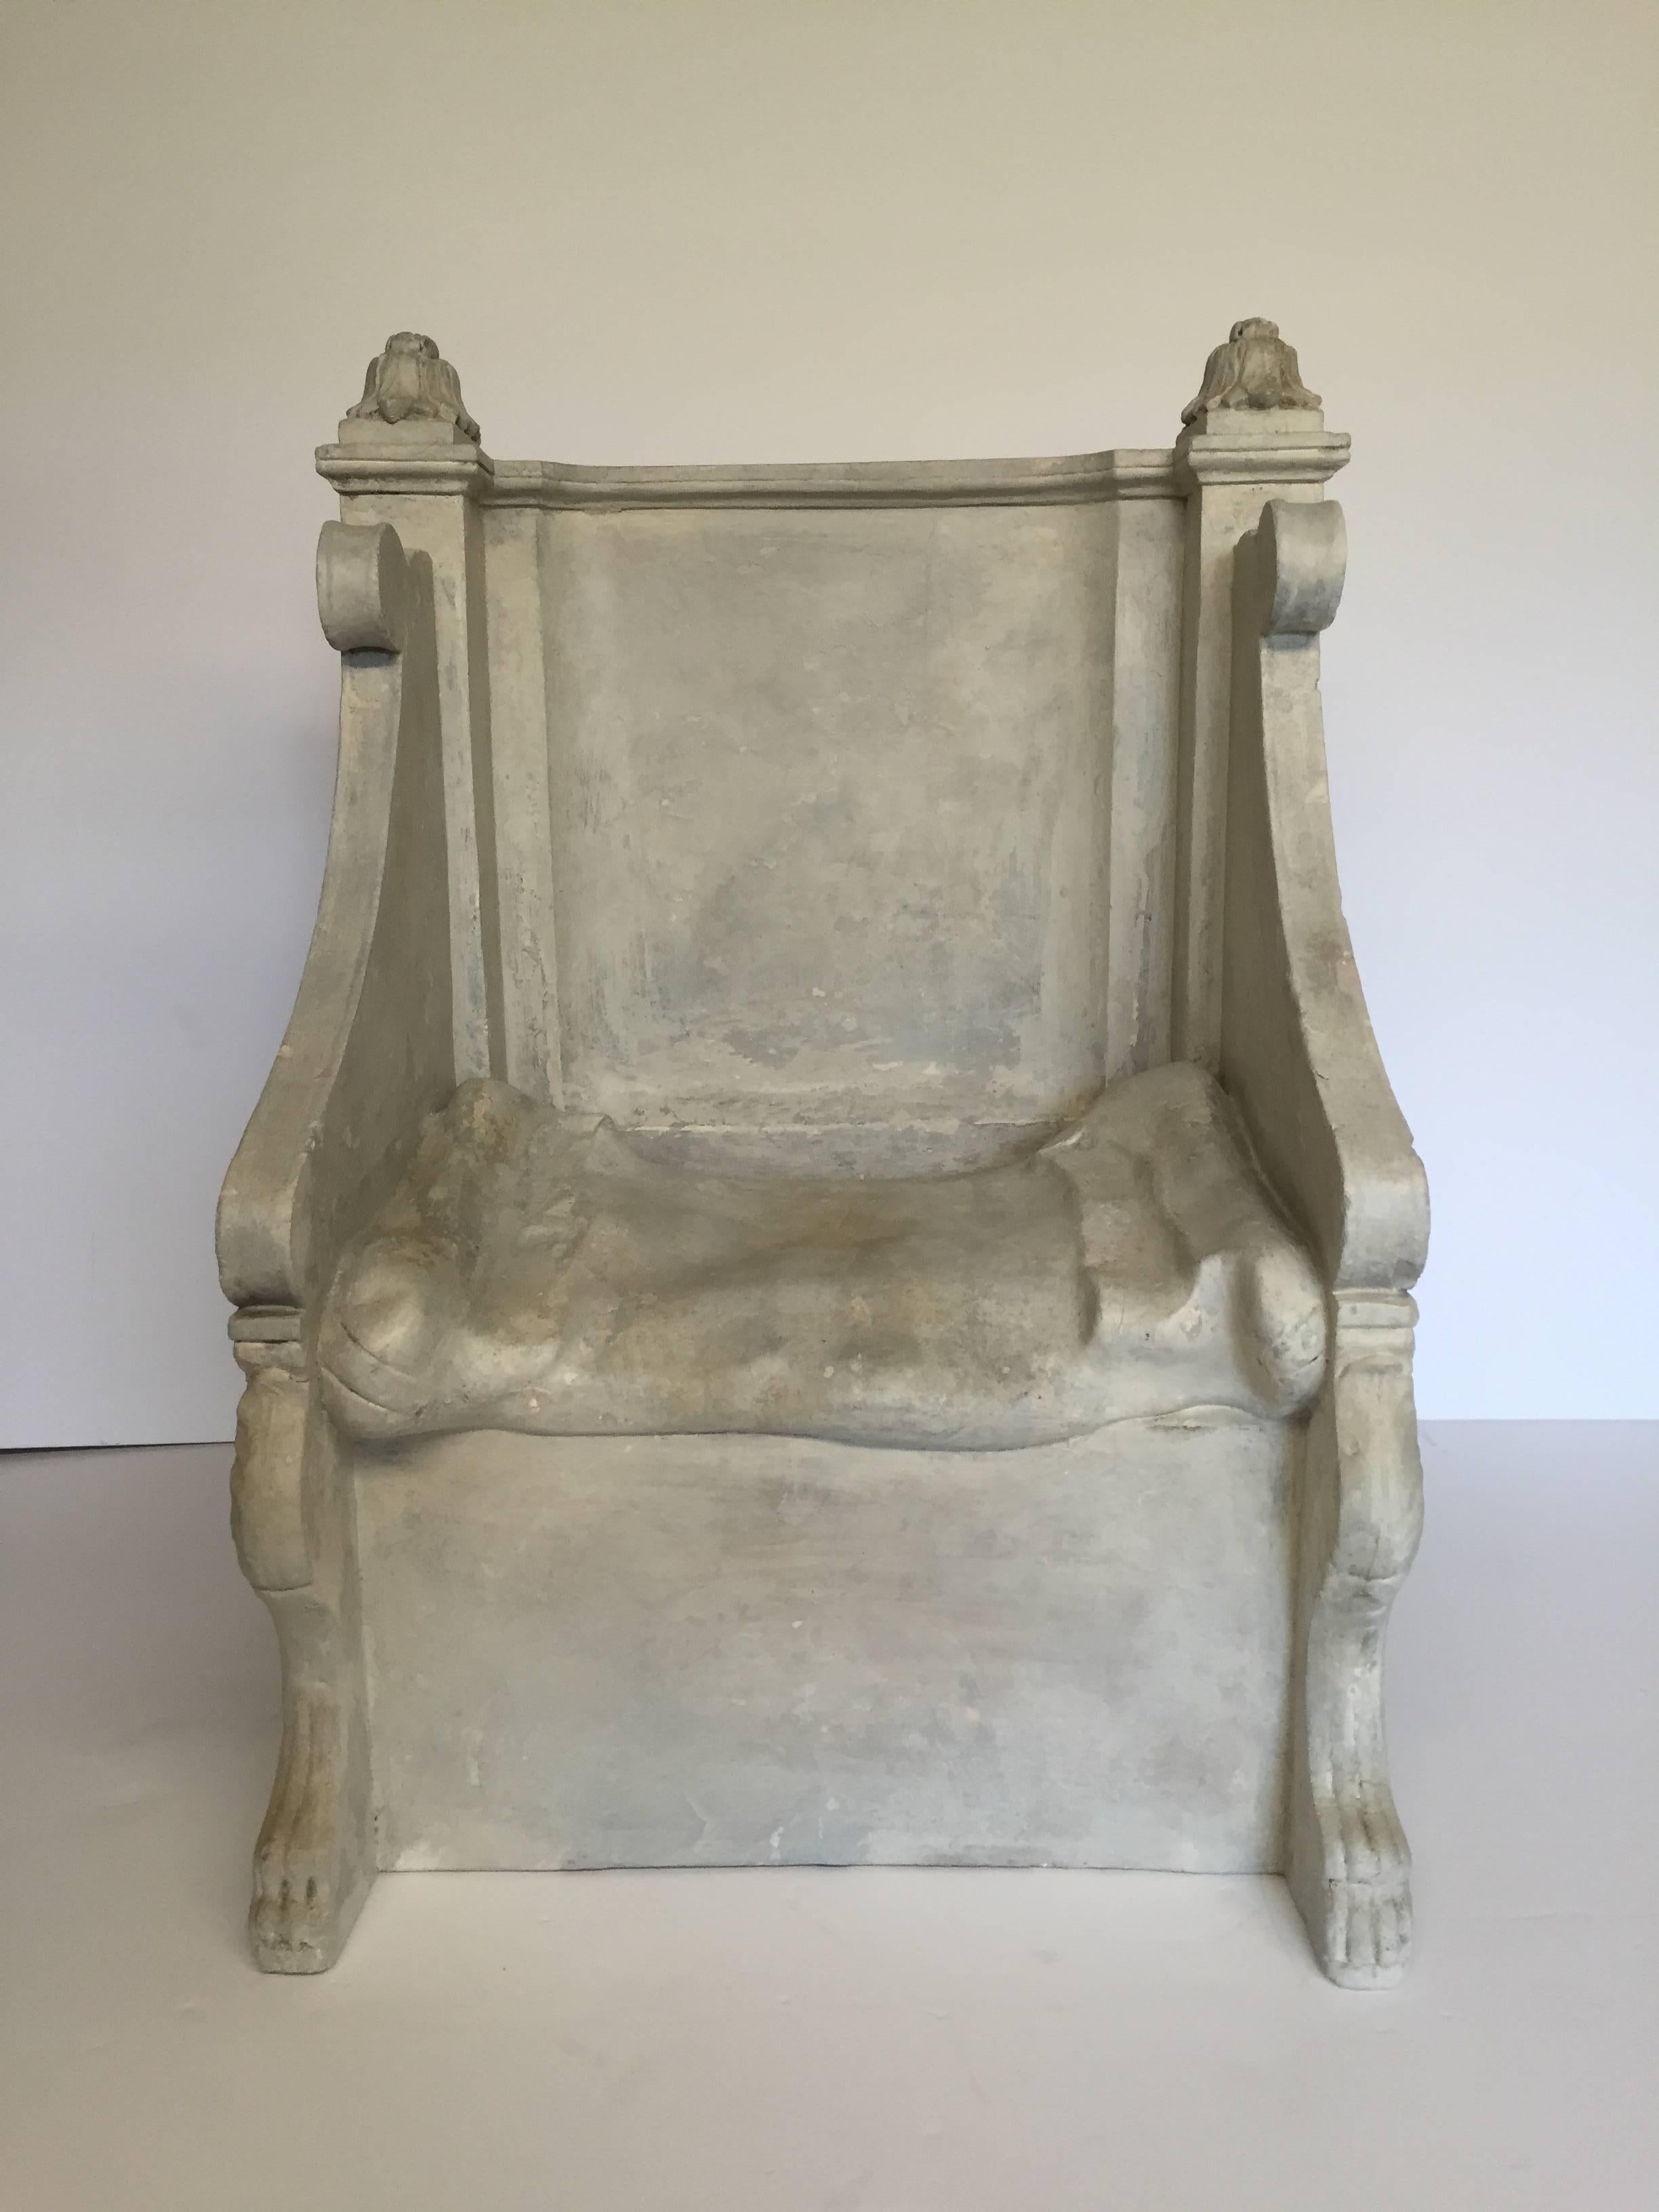 Magnificent and unusual Grand Tour plaster model of a Roman throne with gorgeous relief detailing.